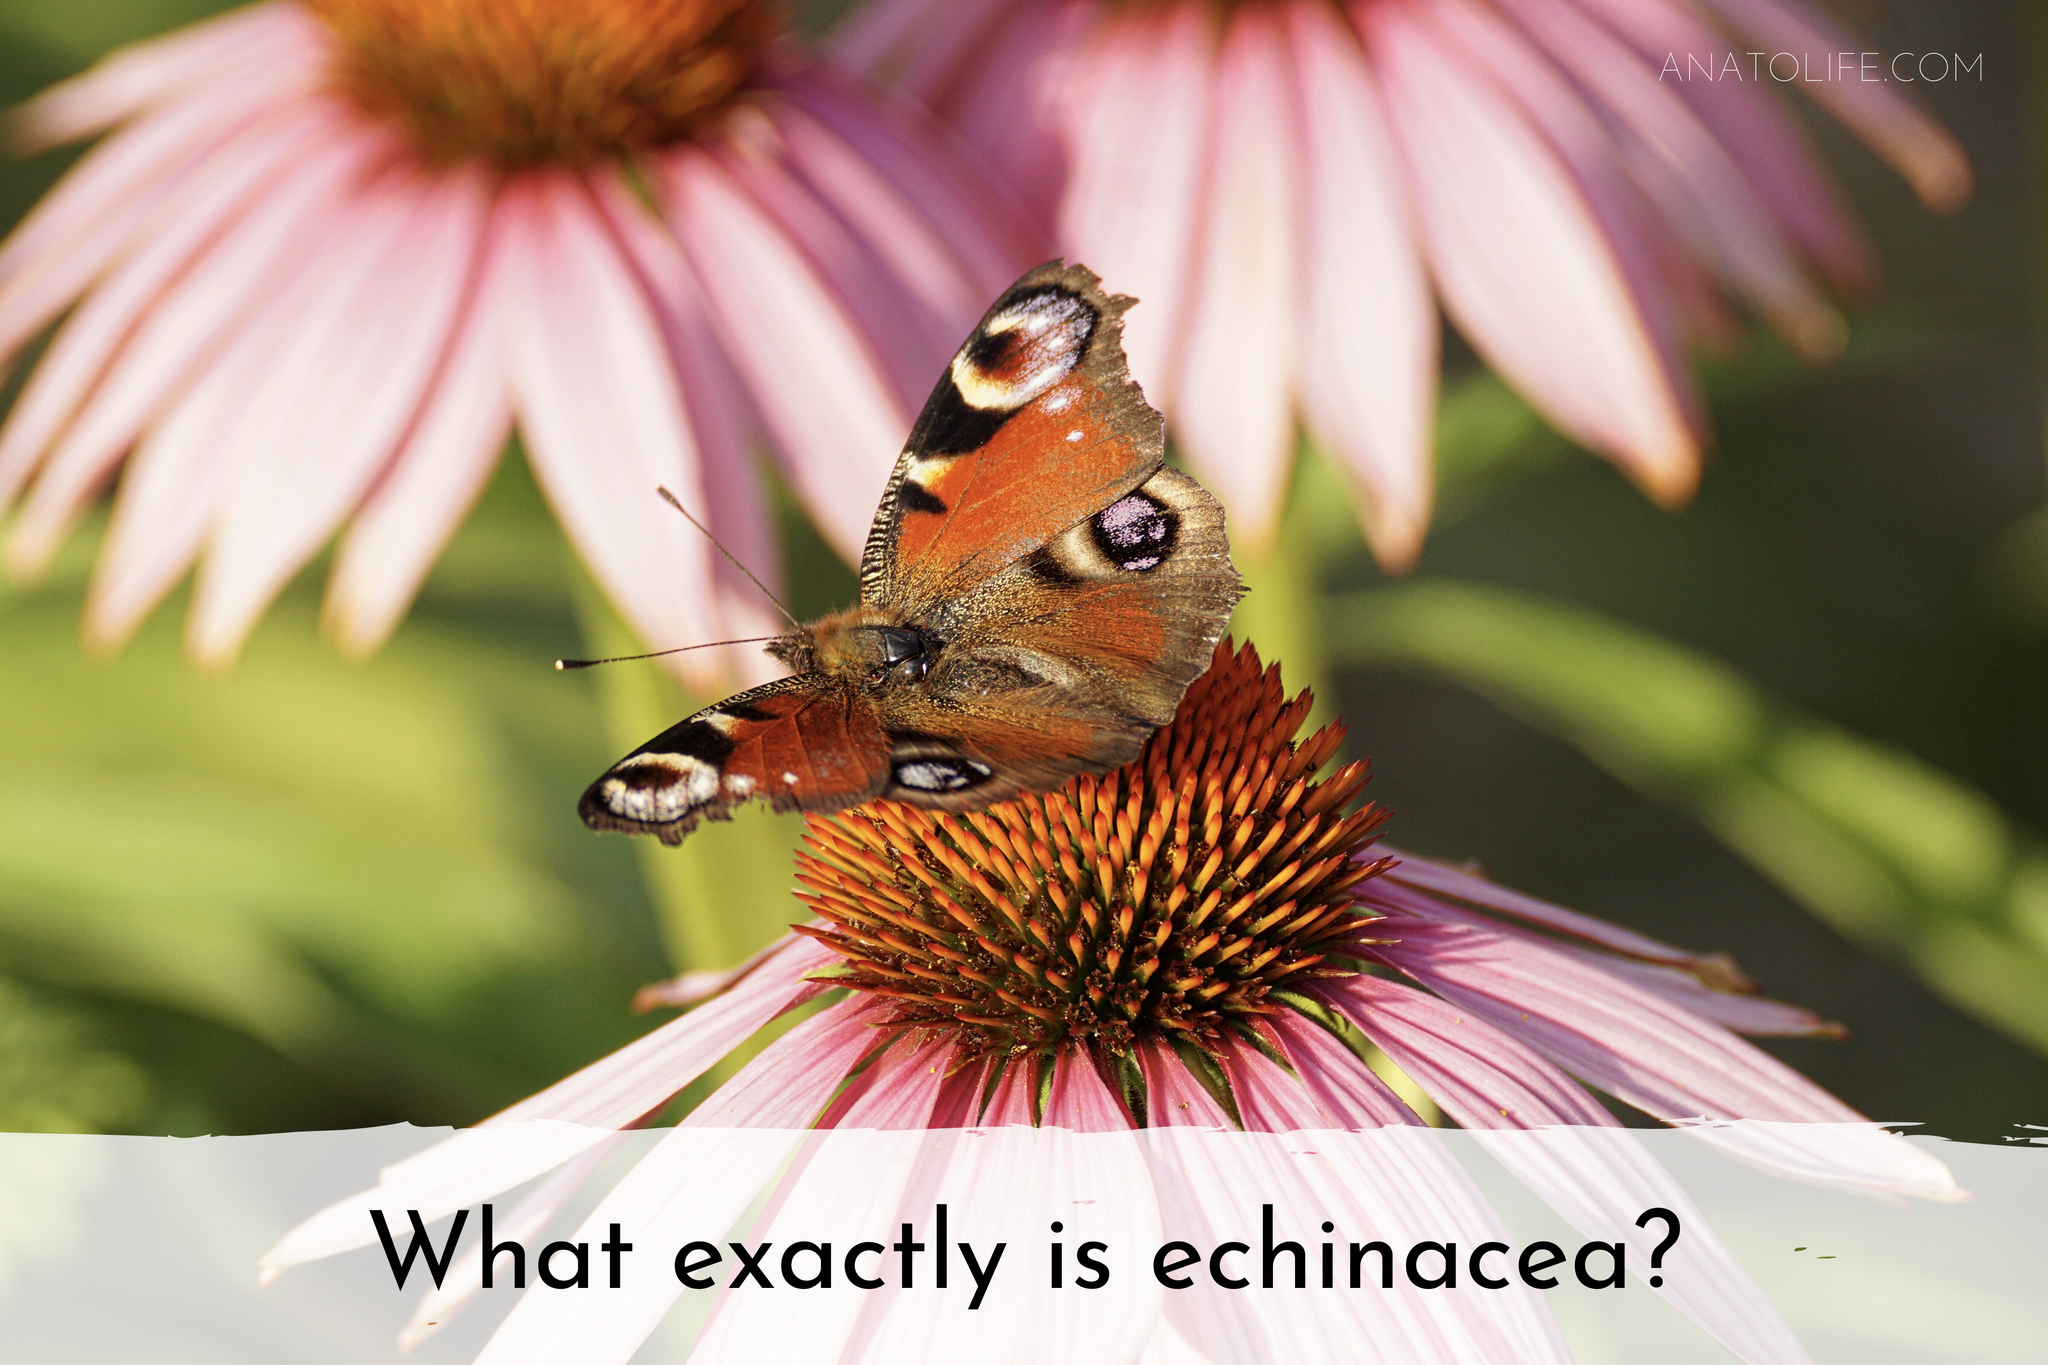 What exactly is echinacea?